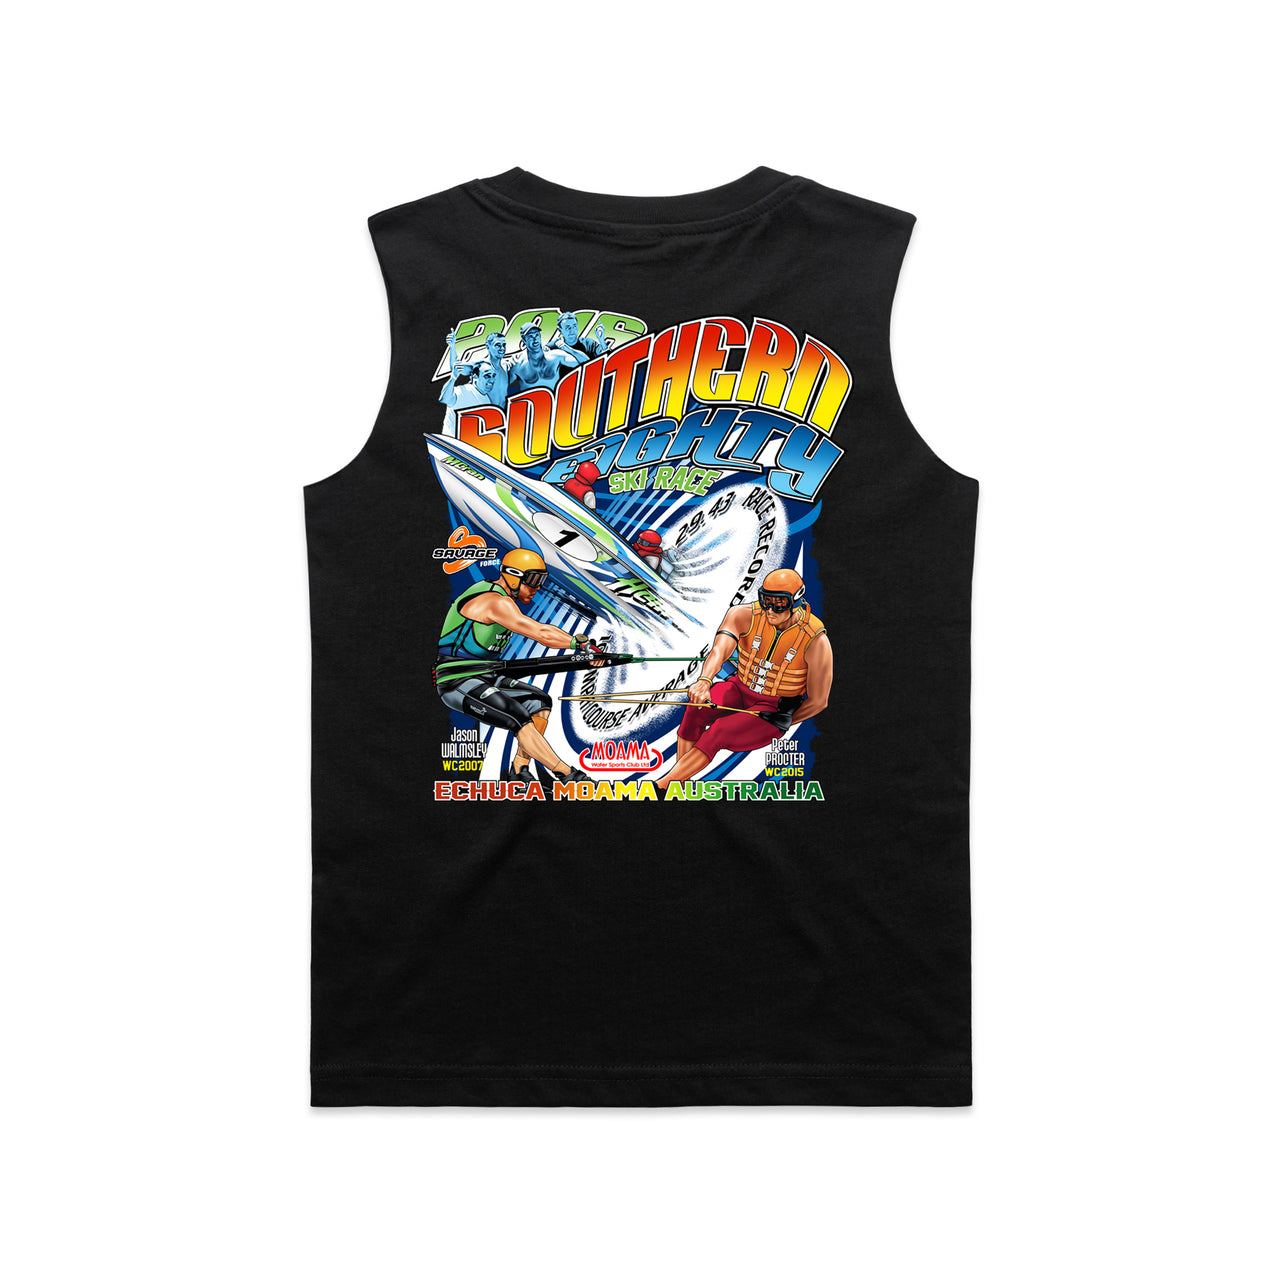 S80 2016 Hellrazor Event Youth/Kids Tank